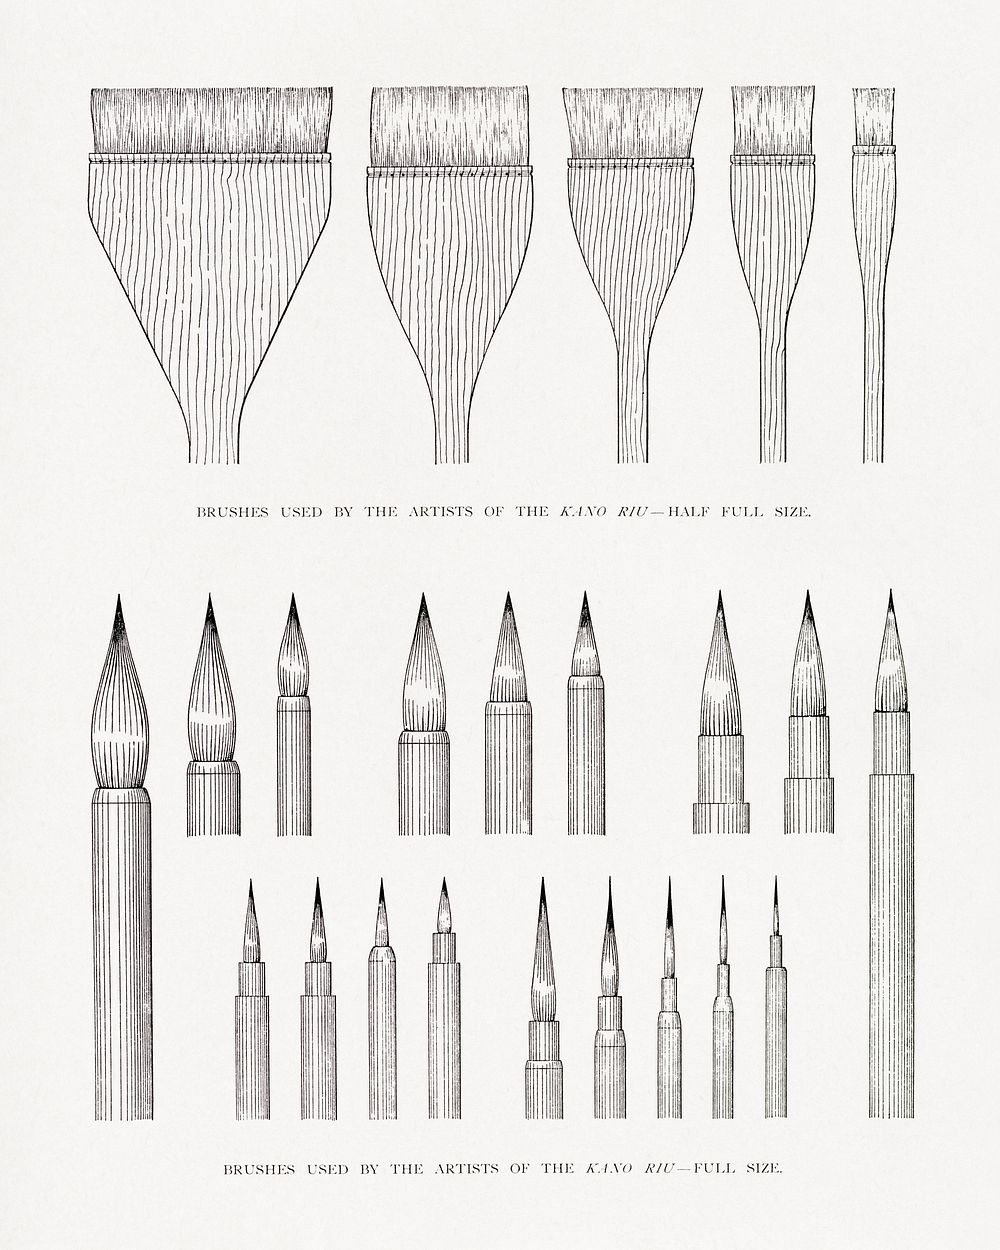 Kano Riu's paint brushes, vintage illustration. Public domain image from our own original 1884 edition of The Ornamental…